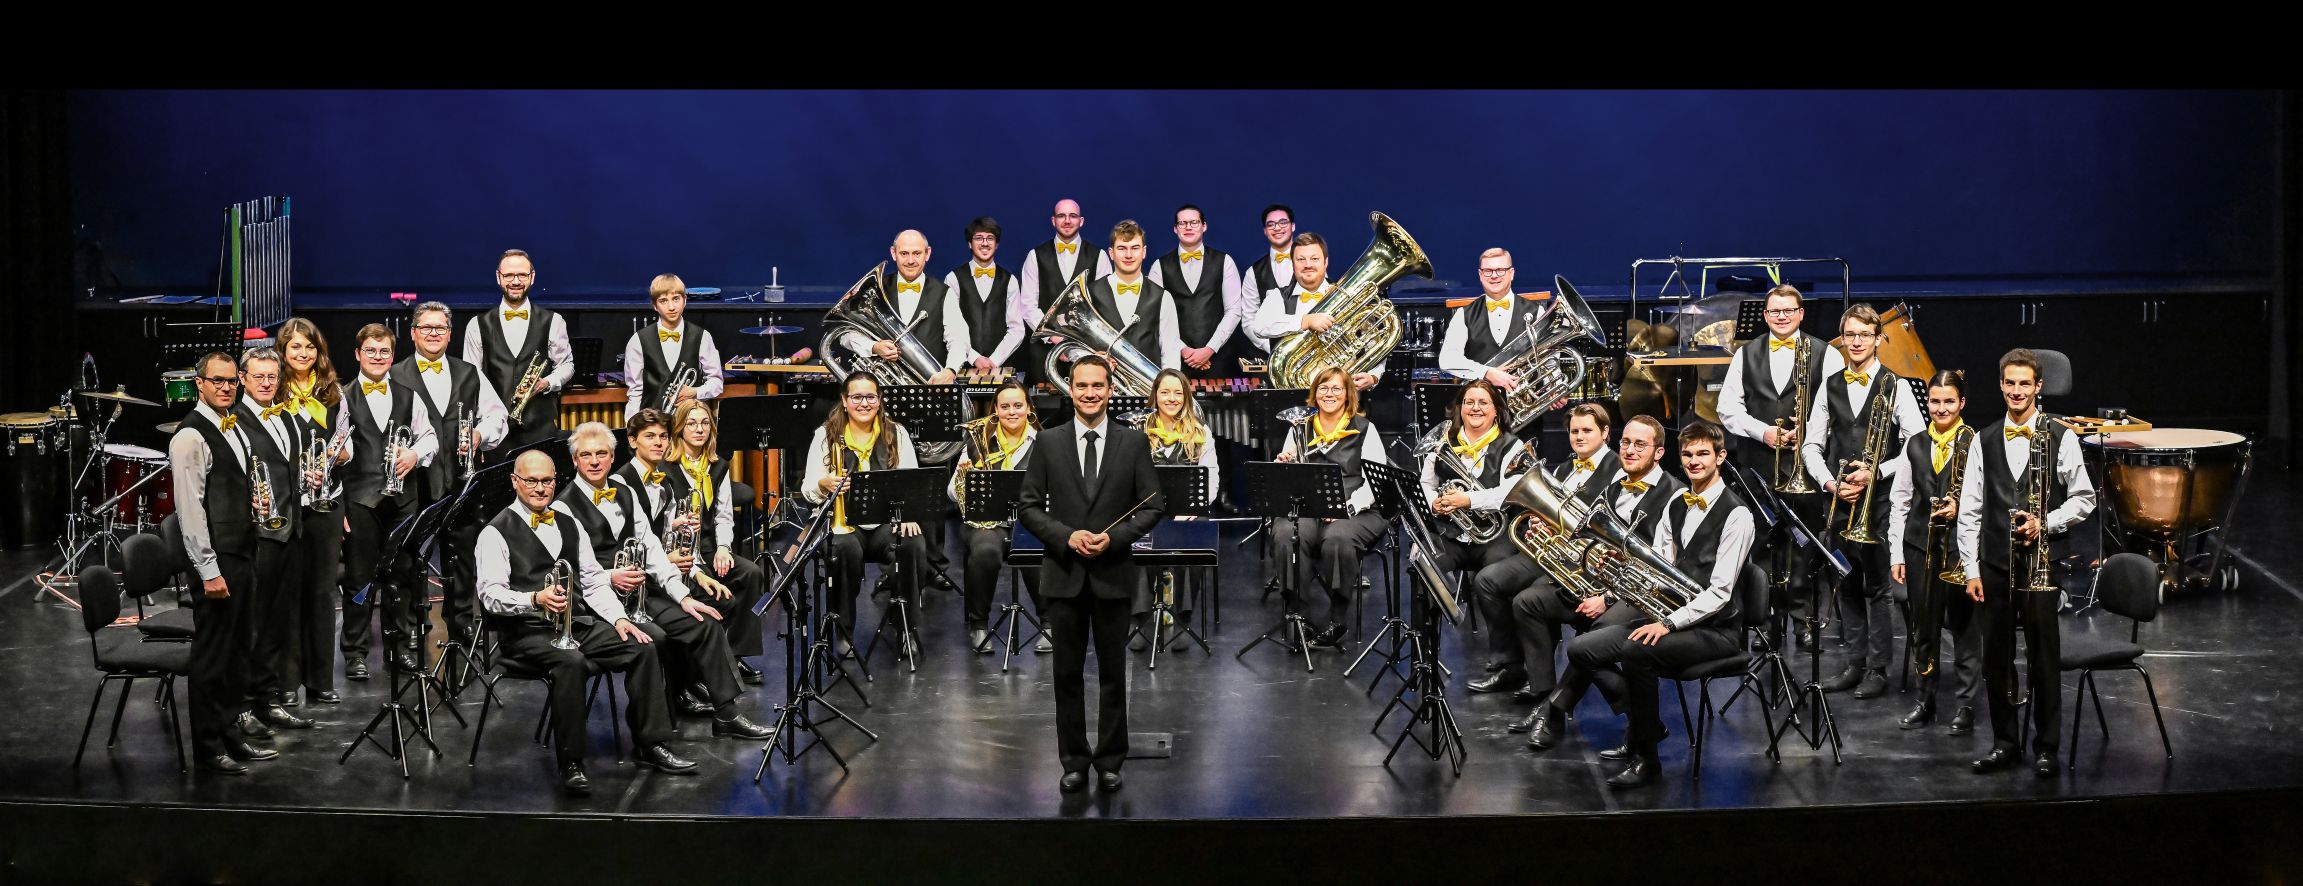 Brass Band of the Conservatory: Saint-Etienne Concert